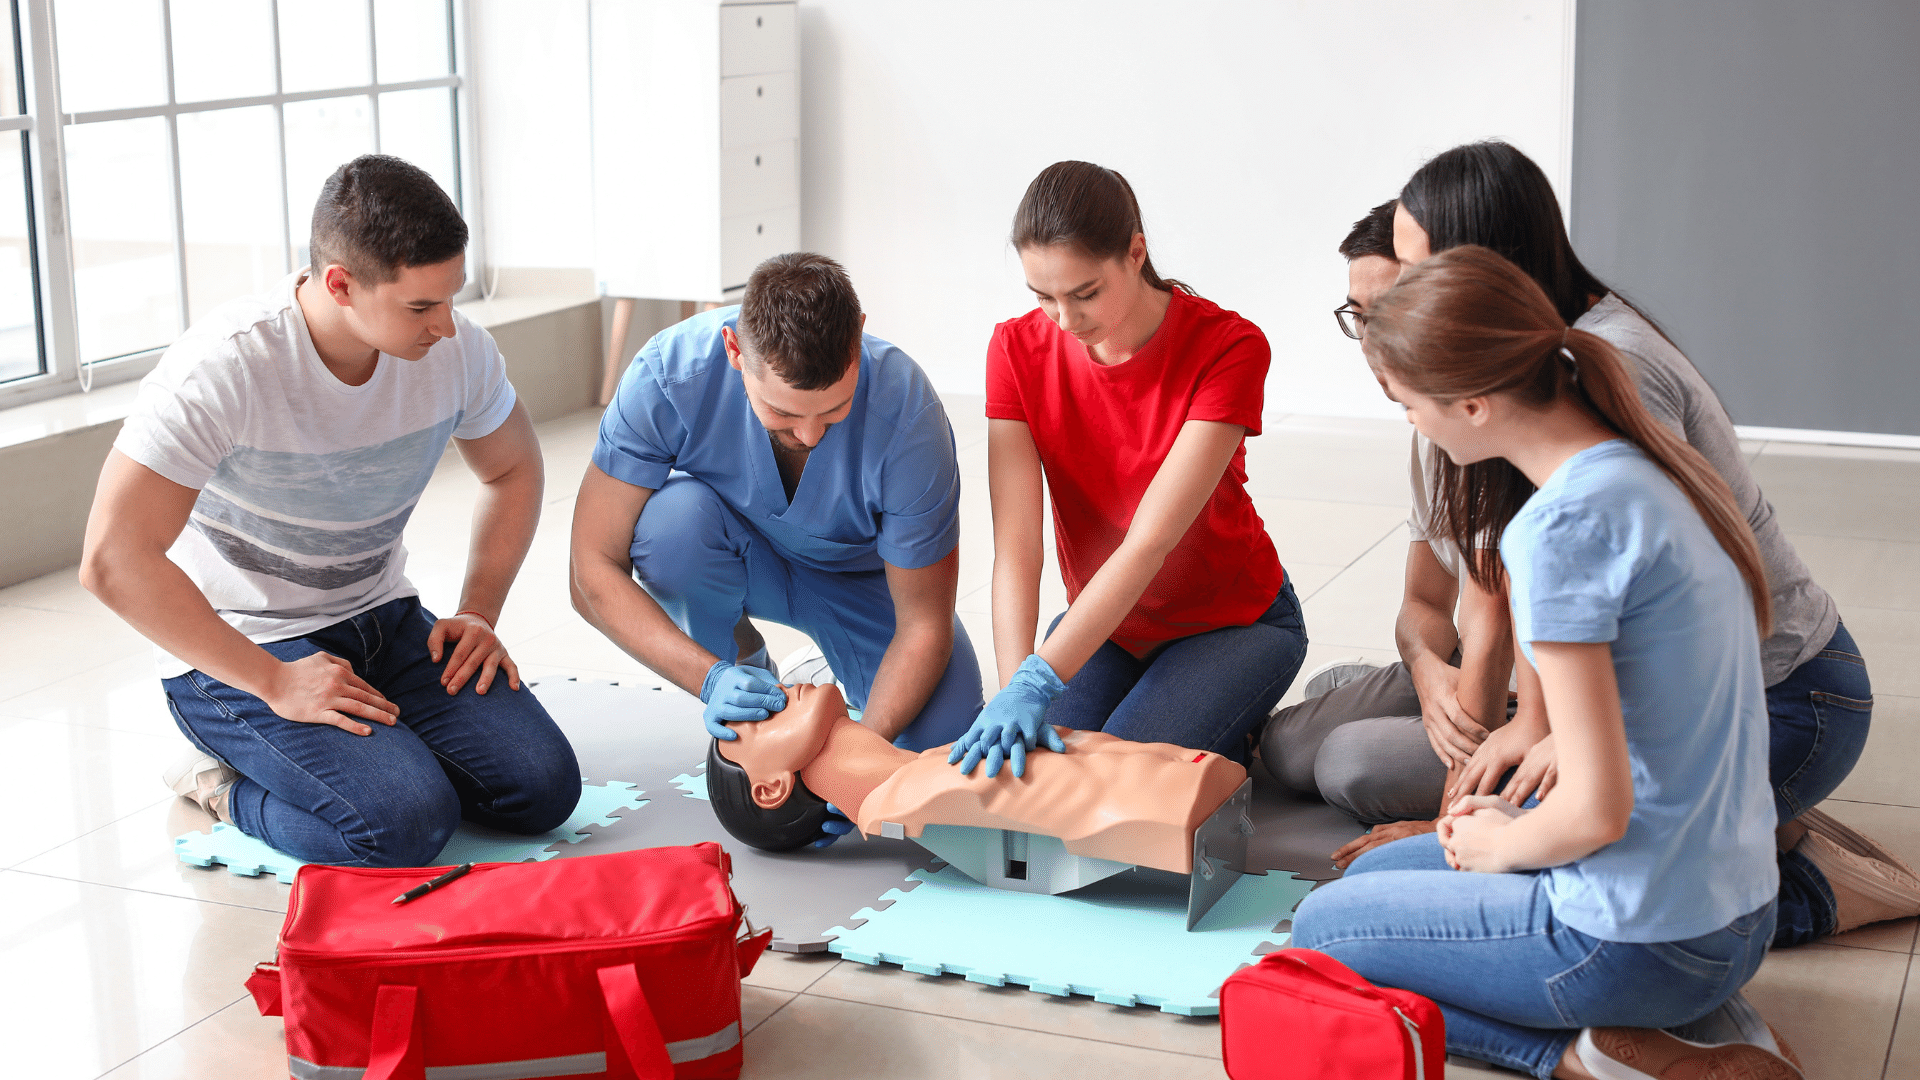 Instructors demonstrating CPR on a Mannequin